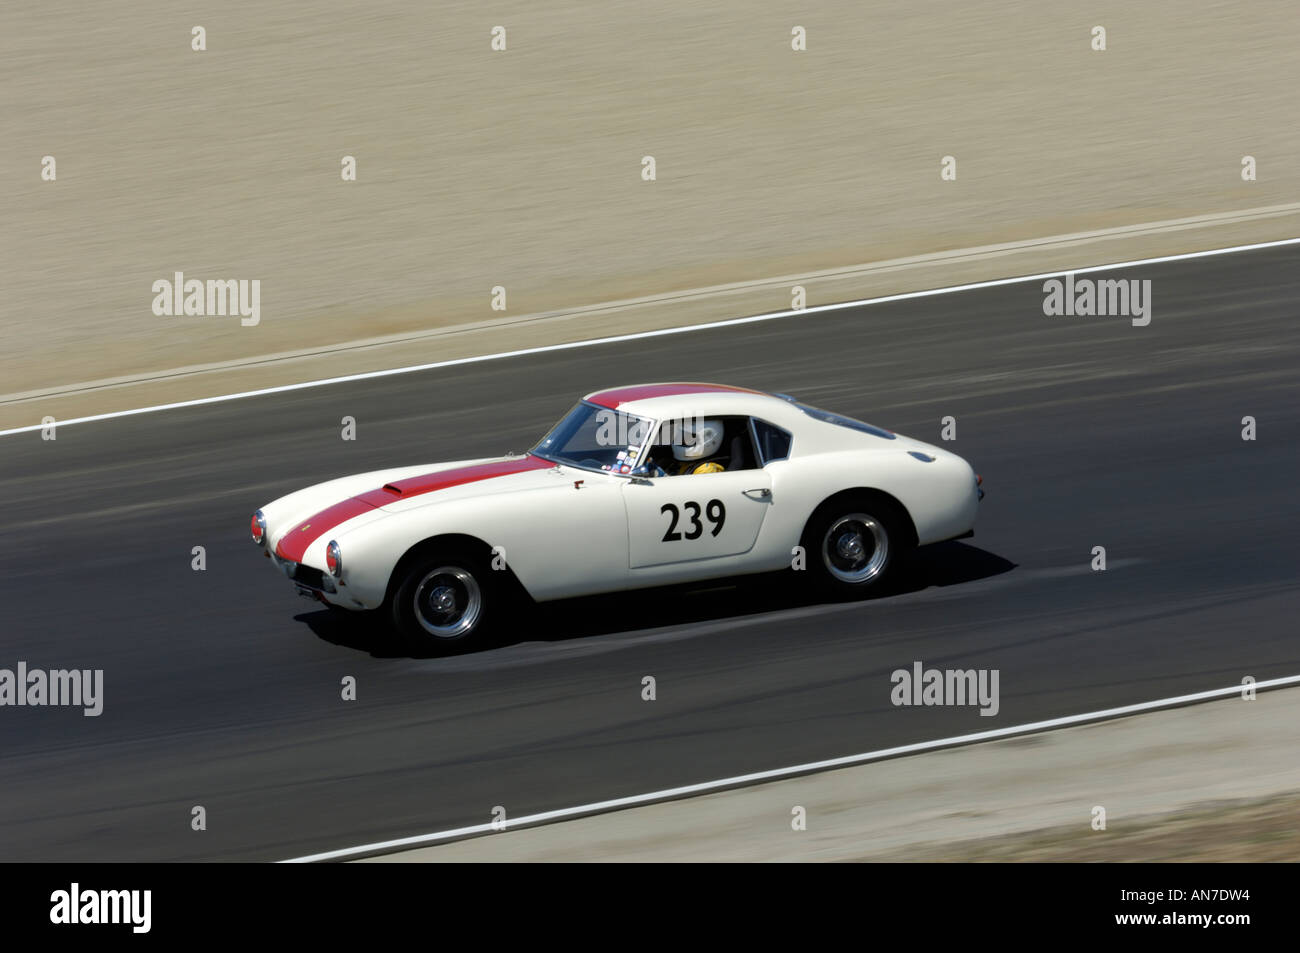 Lula Wang in her 1959 Ferrari 250 GT at the 33rd Rolex Monterey Historic Automobile Races 2006 Stock Photo